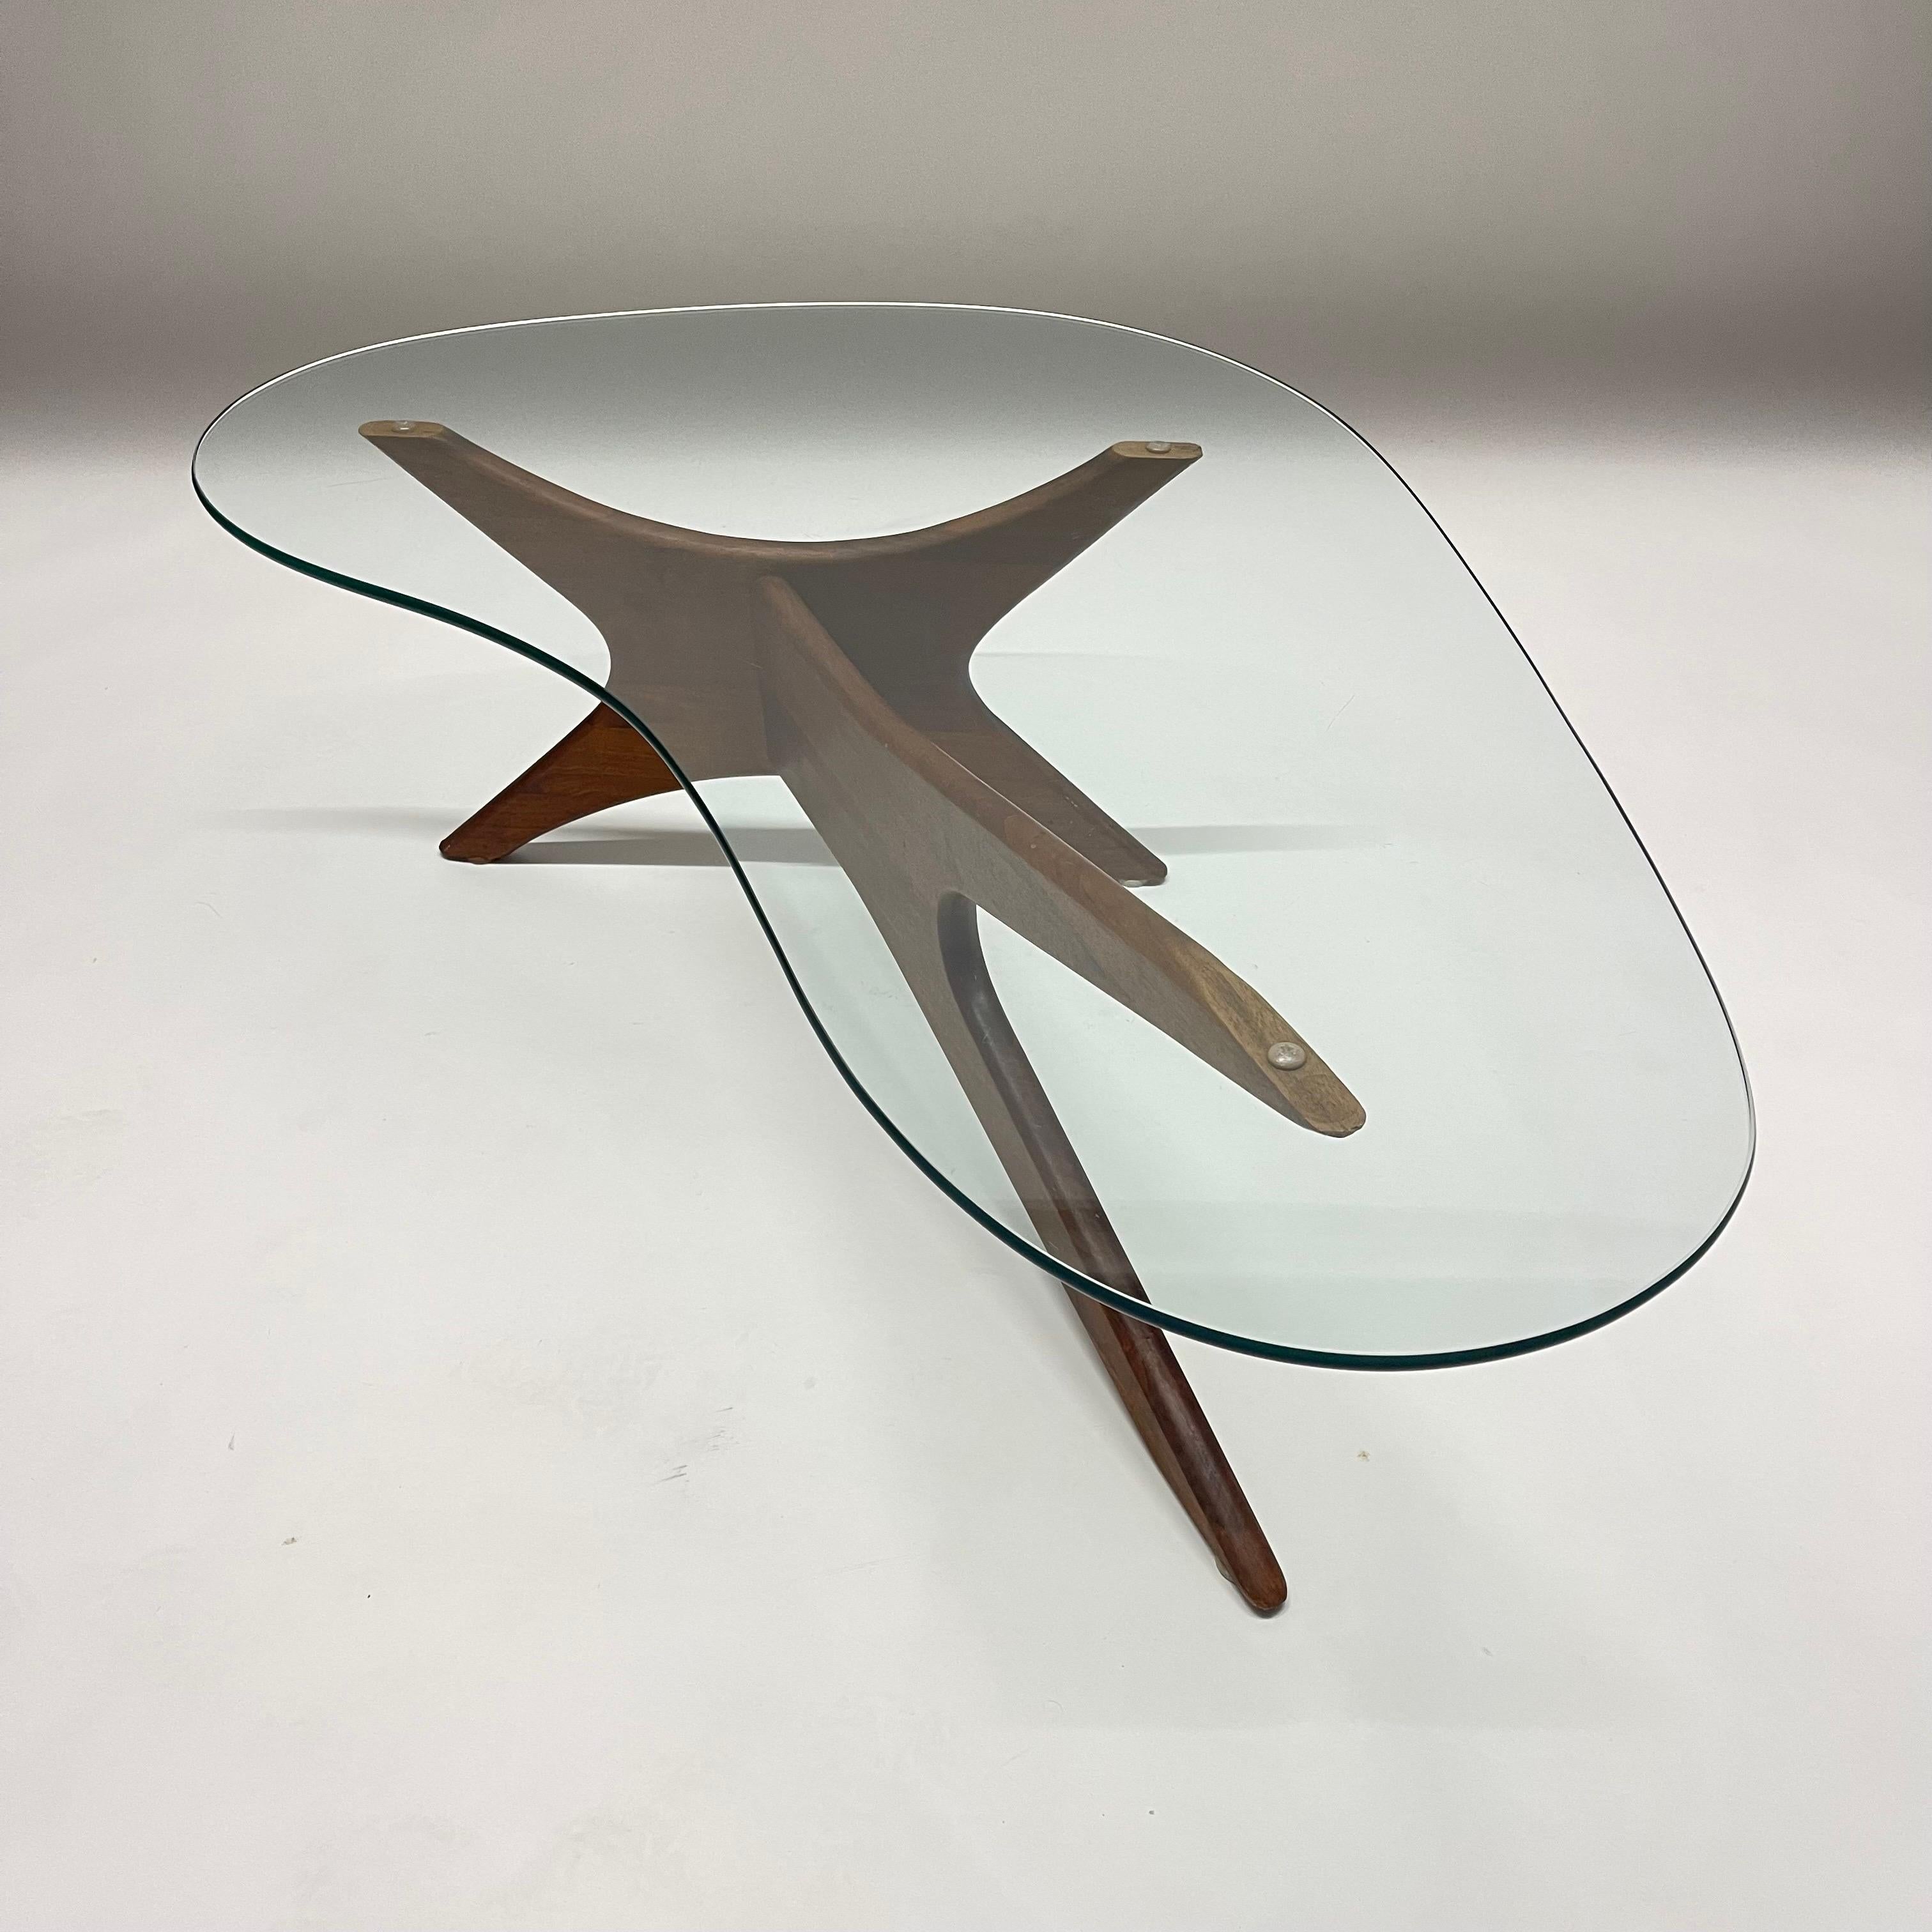 20th Century Rare Adrian Pearsall Walnut and Glass Biomorphic Kidney Coffee or Cocktail Table